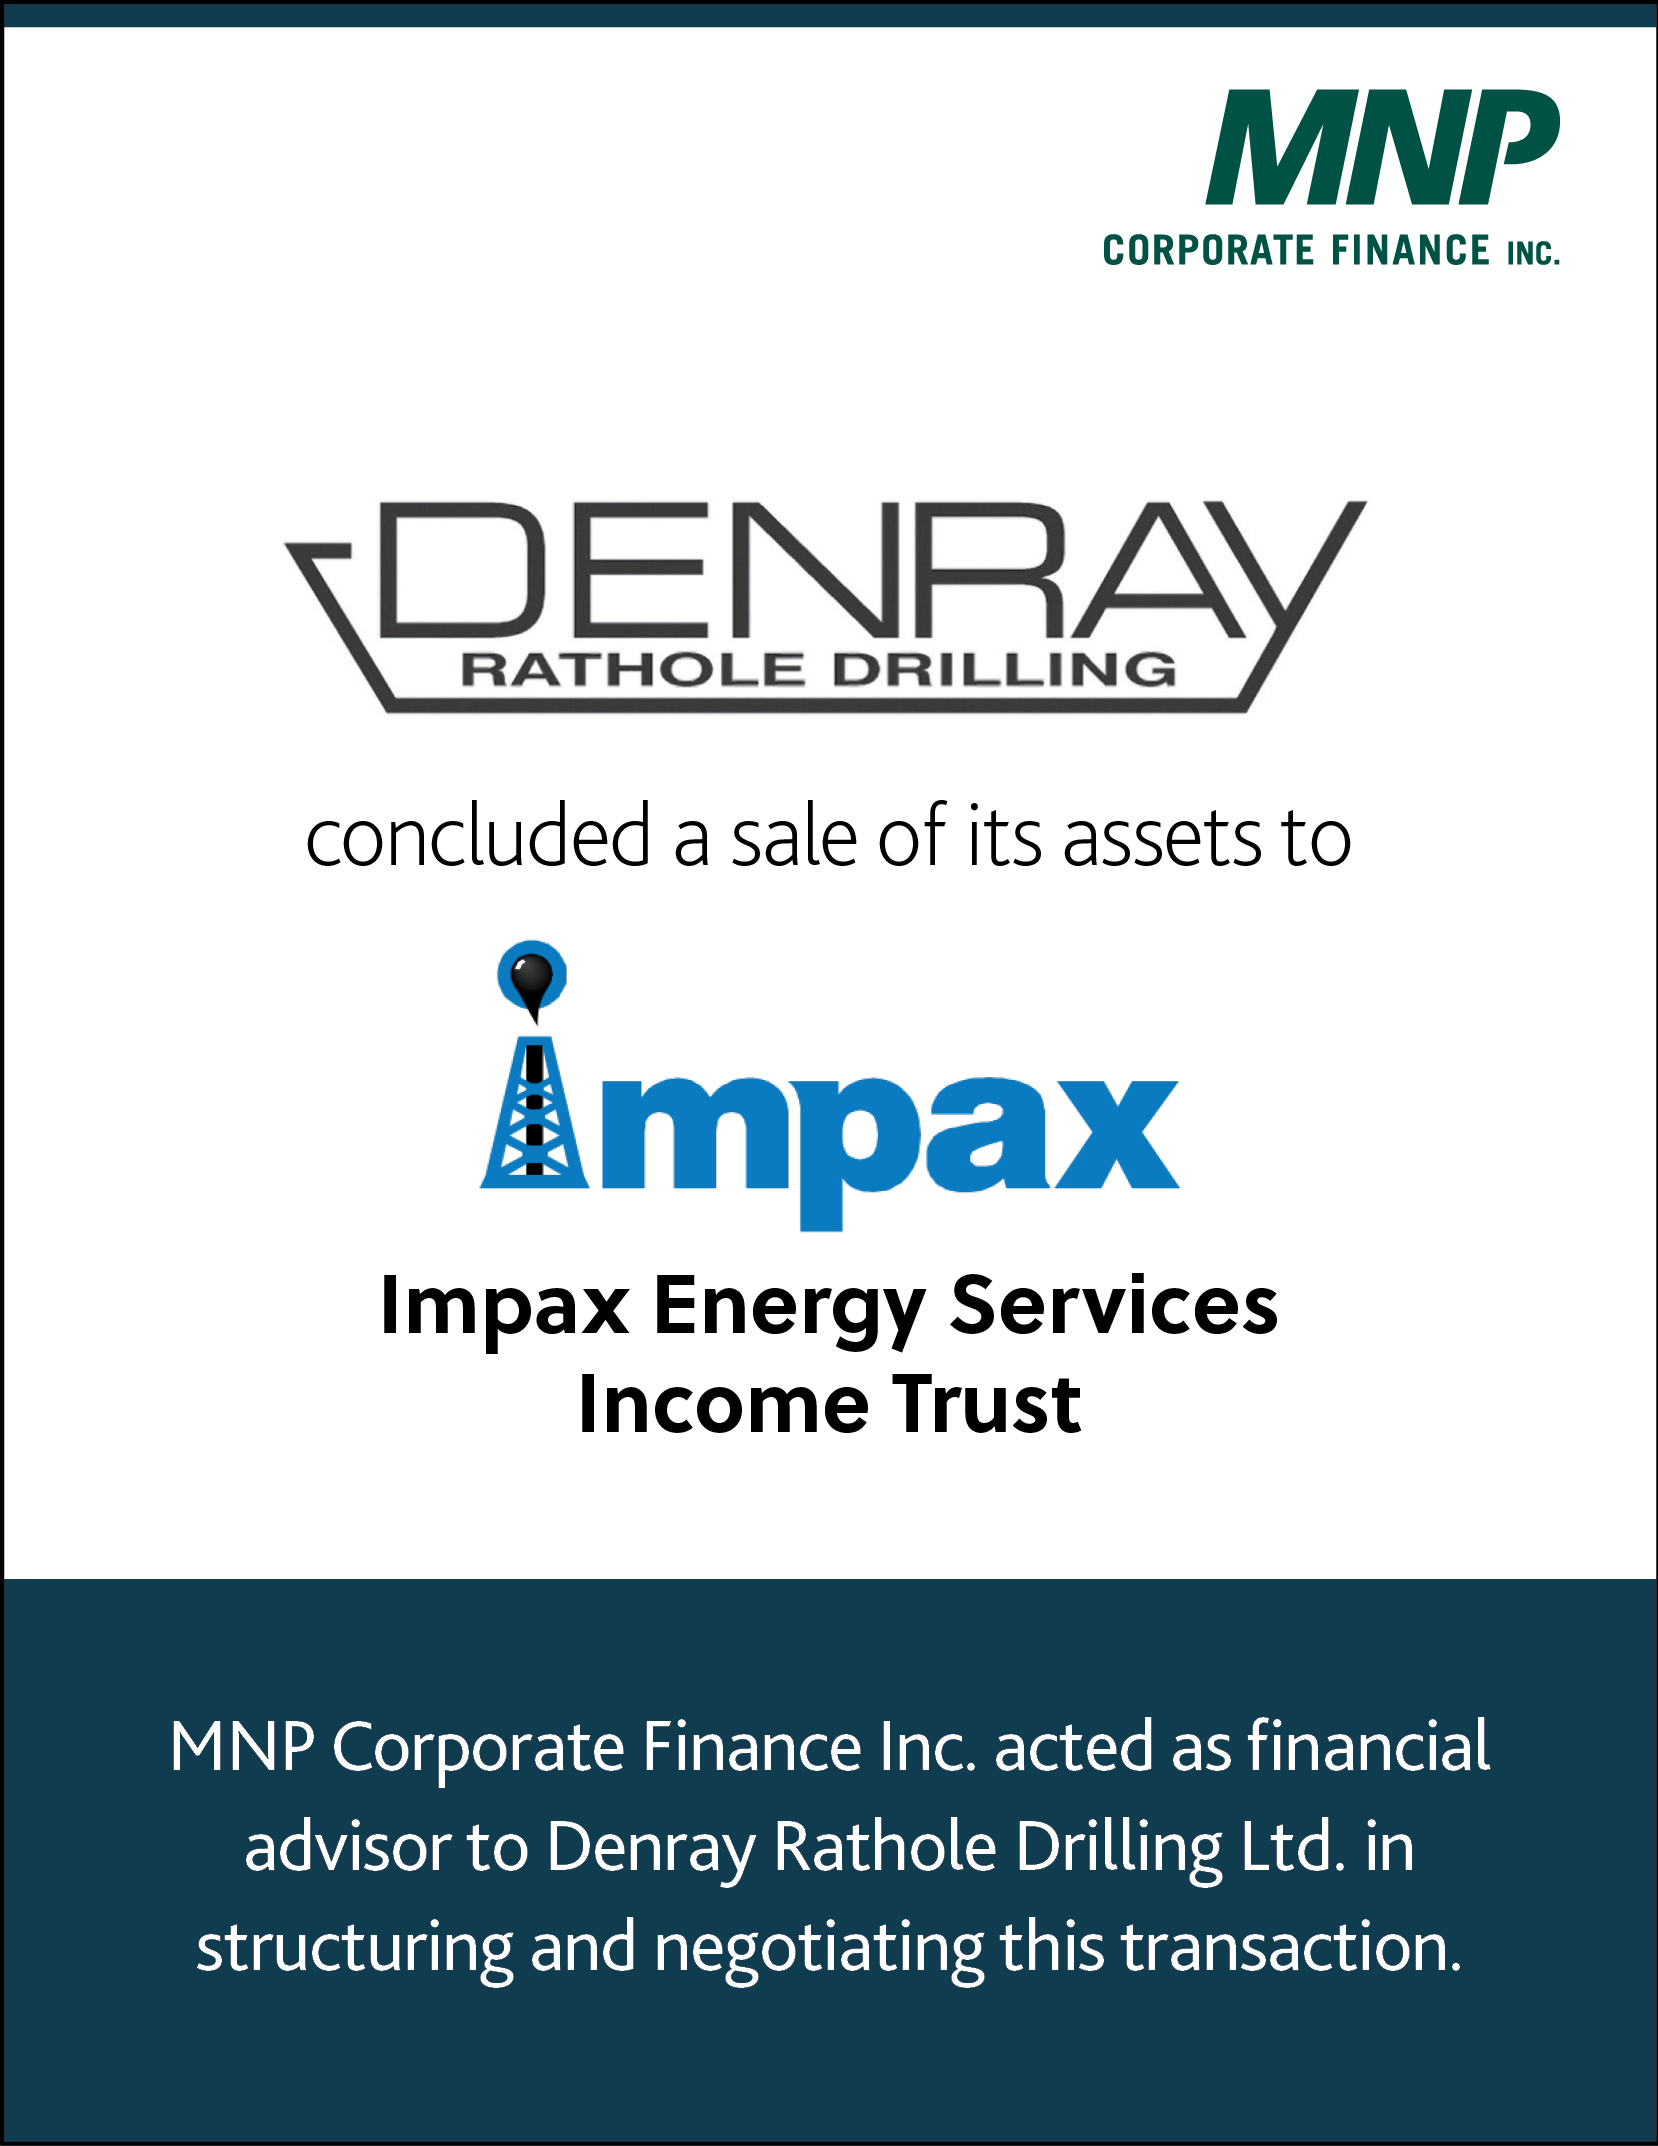 Denray Rathole Drilling concluded a sale of its assets to Impax Energy Services Income Trust 